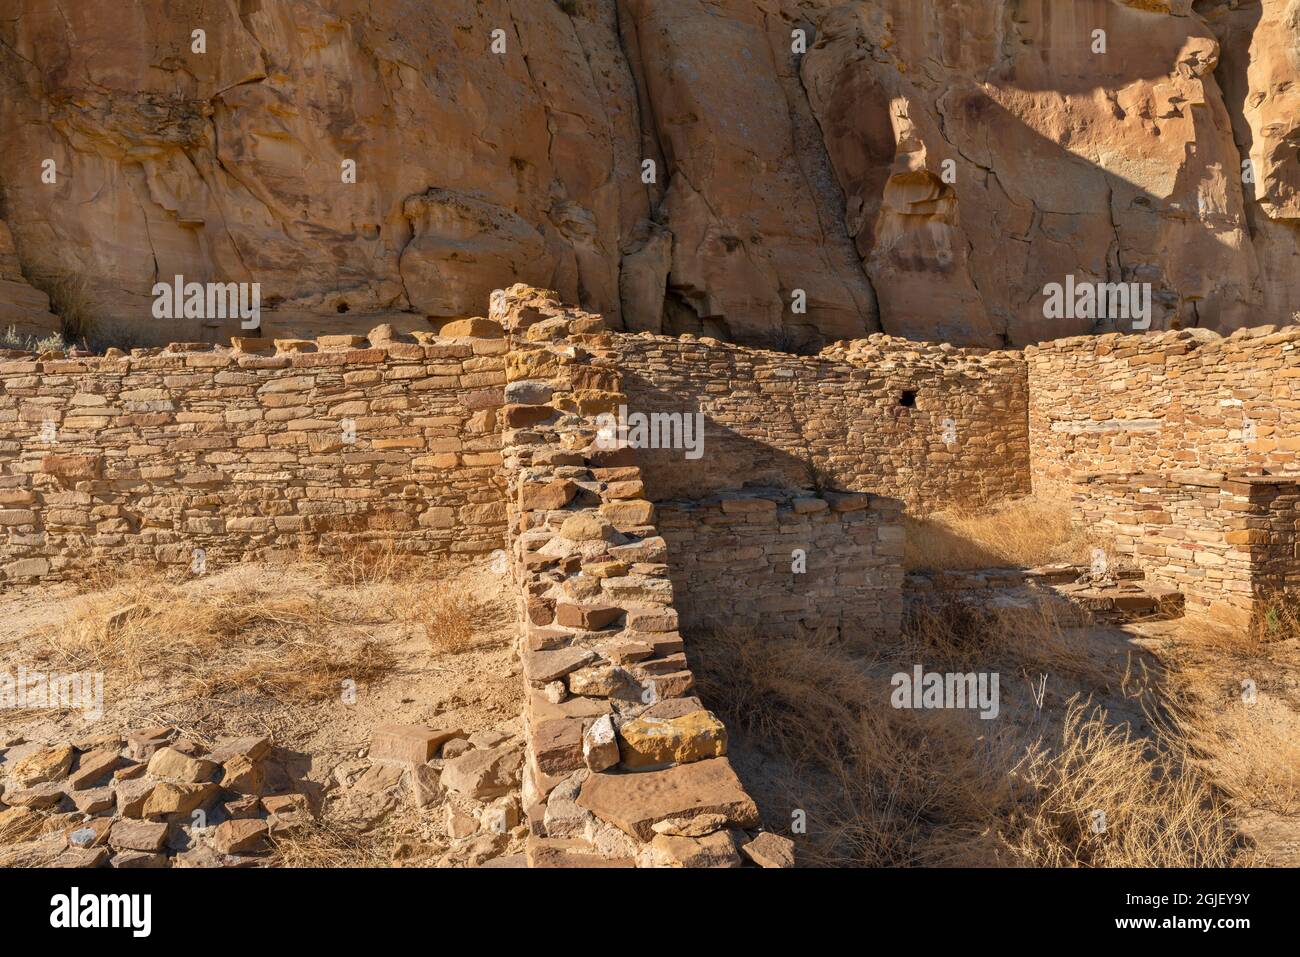 USA, New Mexico. Chaco Culture National Historic Park, Remains of Chetro Ketl, a stonewall masonry dwelling or Great House which began about AD 1000. Stock Photo